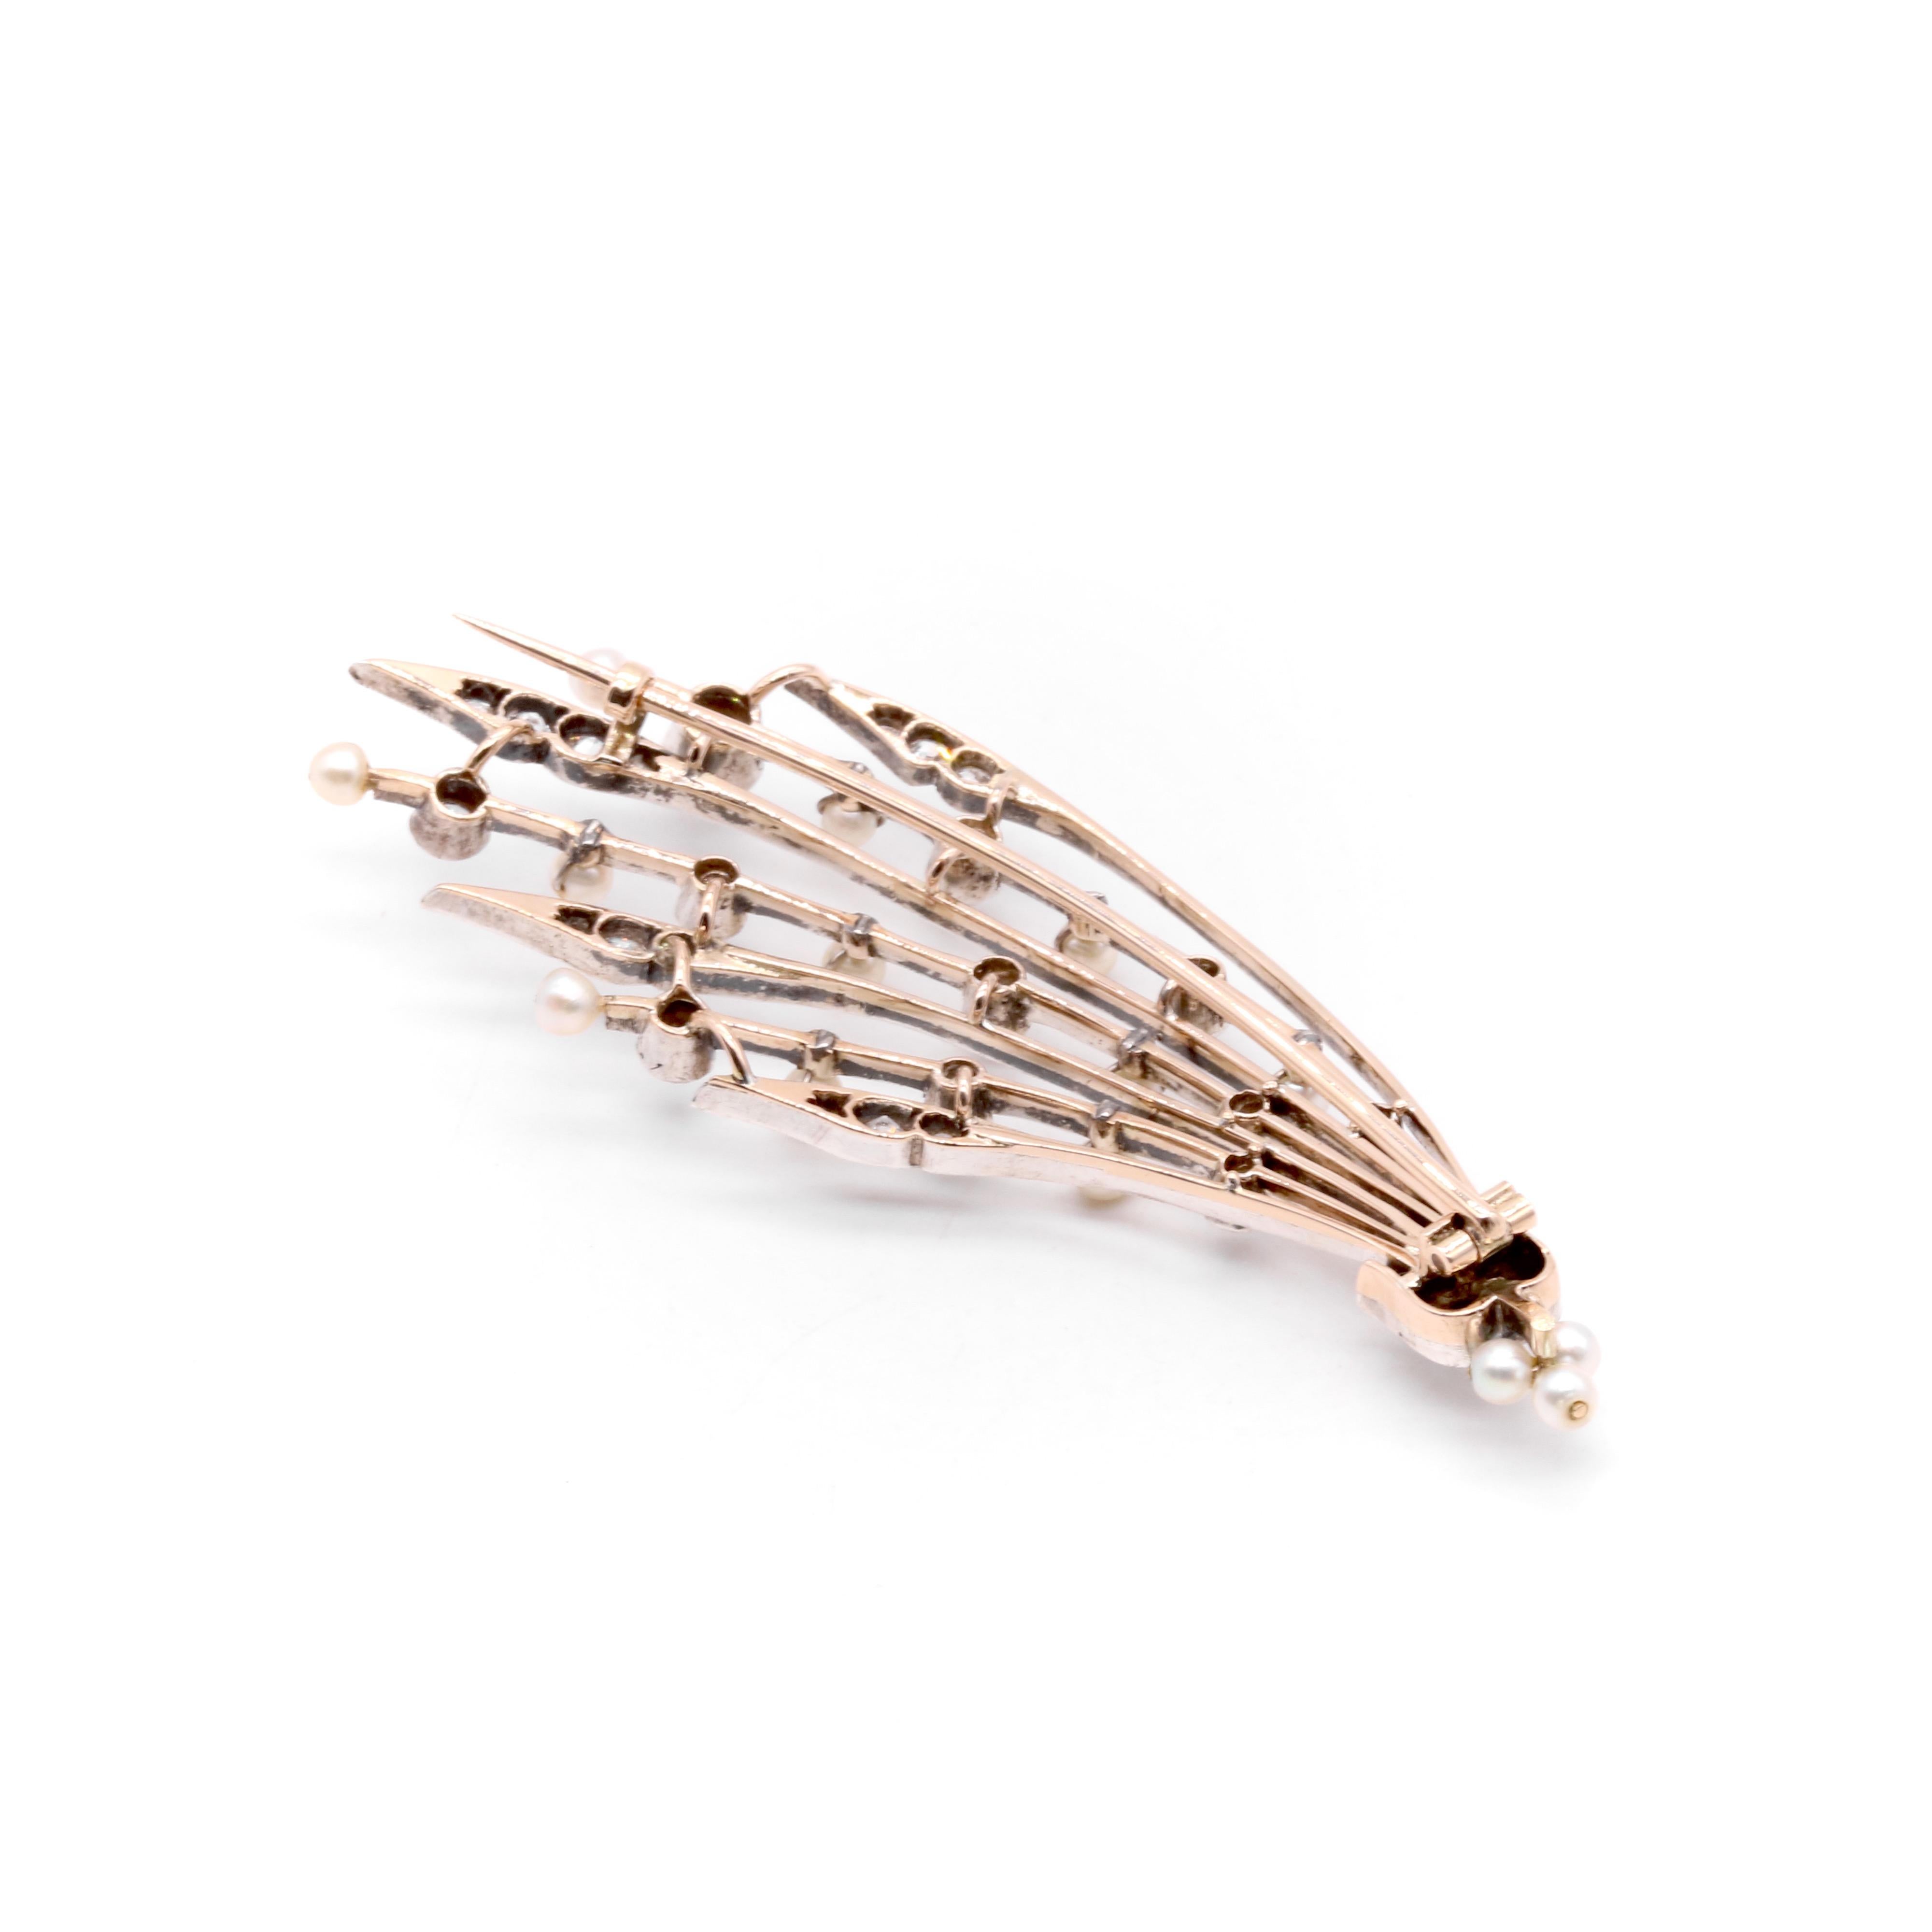 Antique Edwardian 15K Gold & Silver 1.72ctw Diamond Pearl Halley’s Comet Brooch For Sale 3